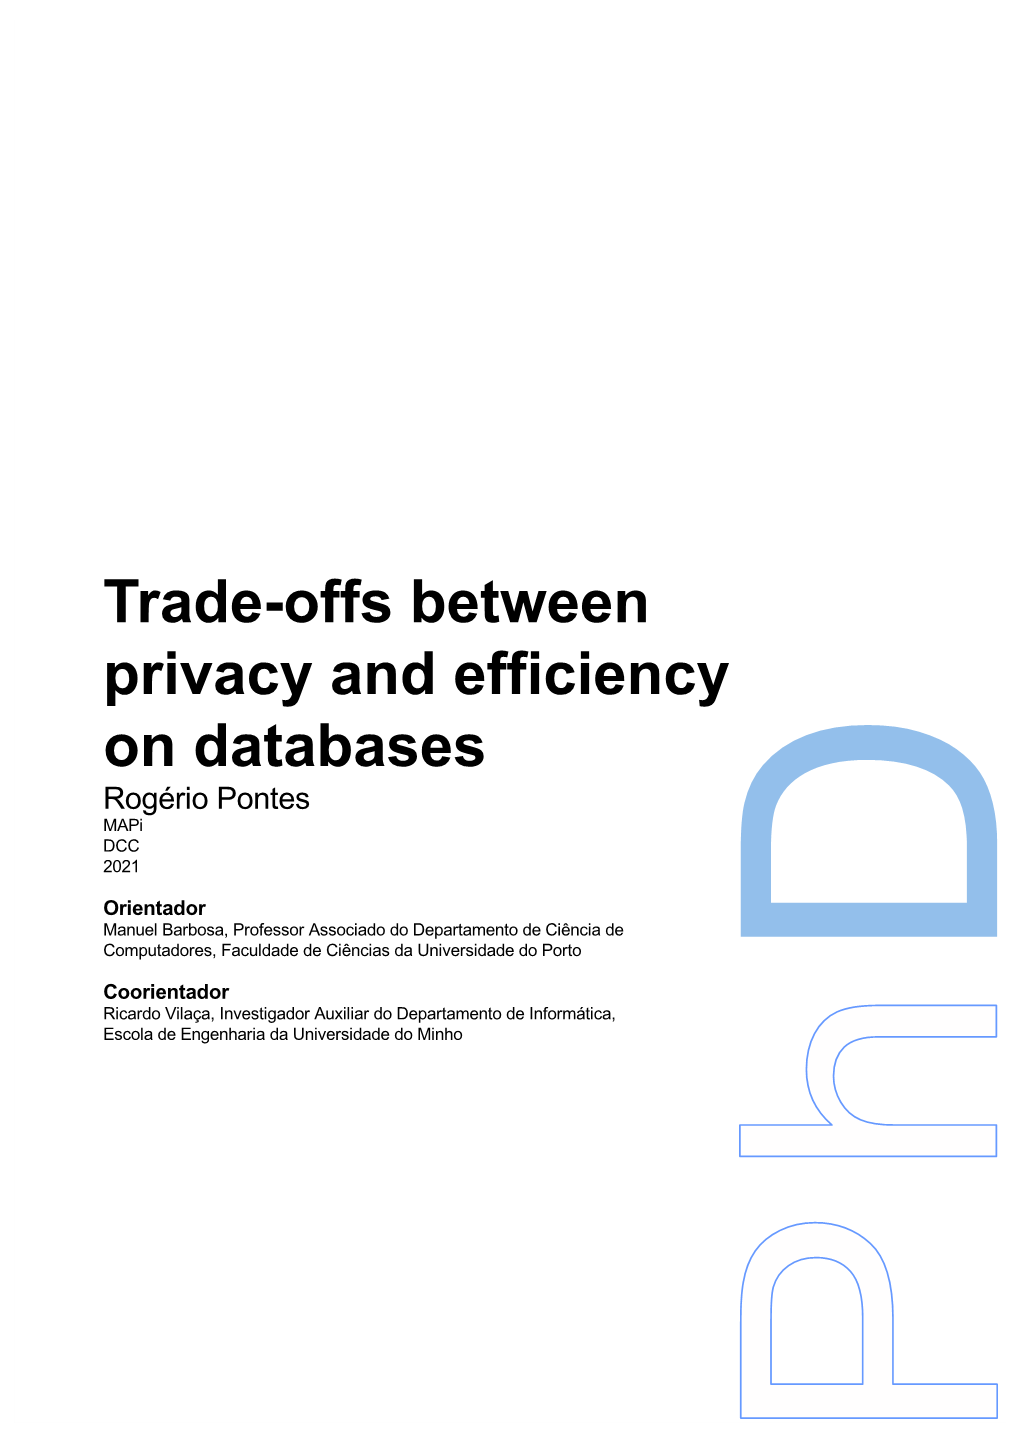 Trade-Offs Between Privacy and Efficiency on Databases